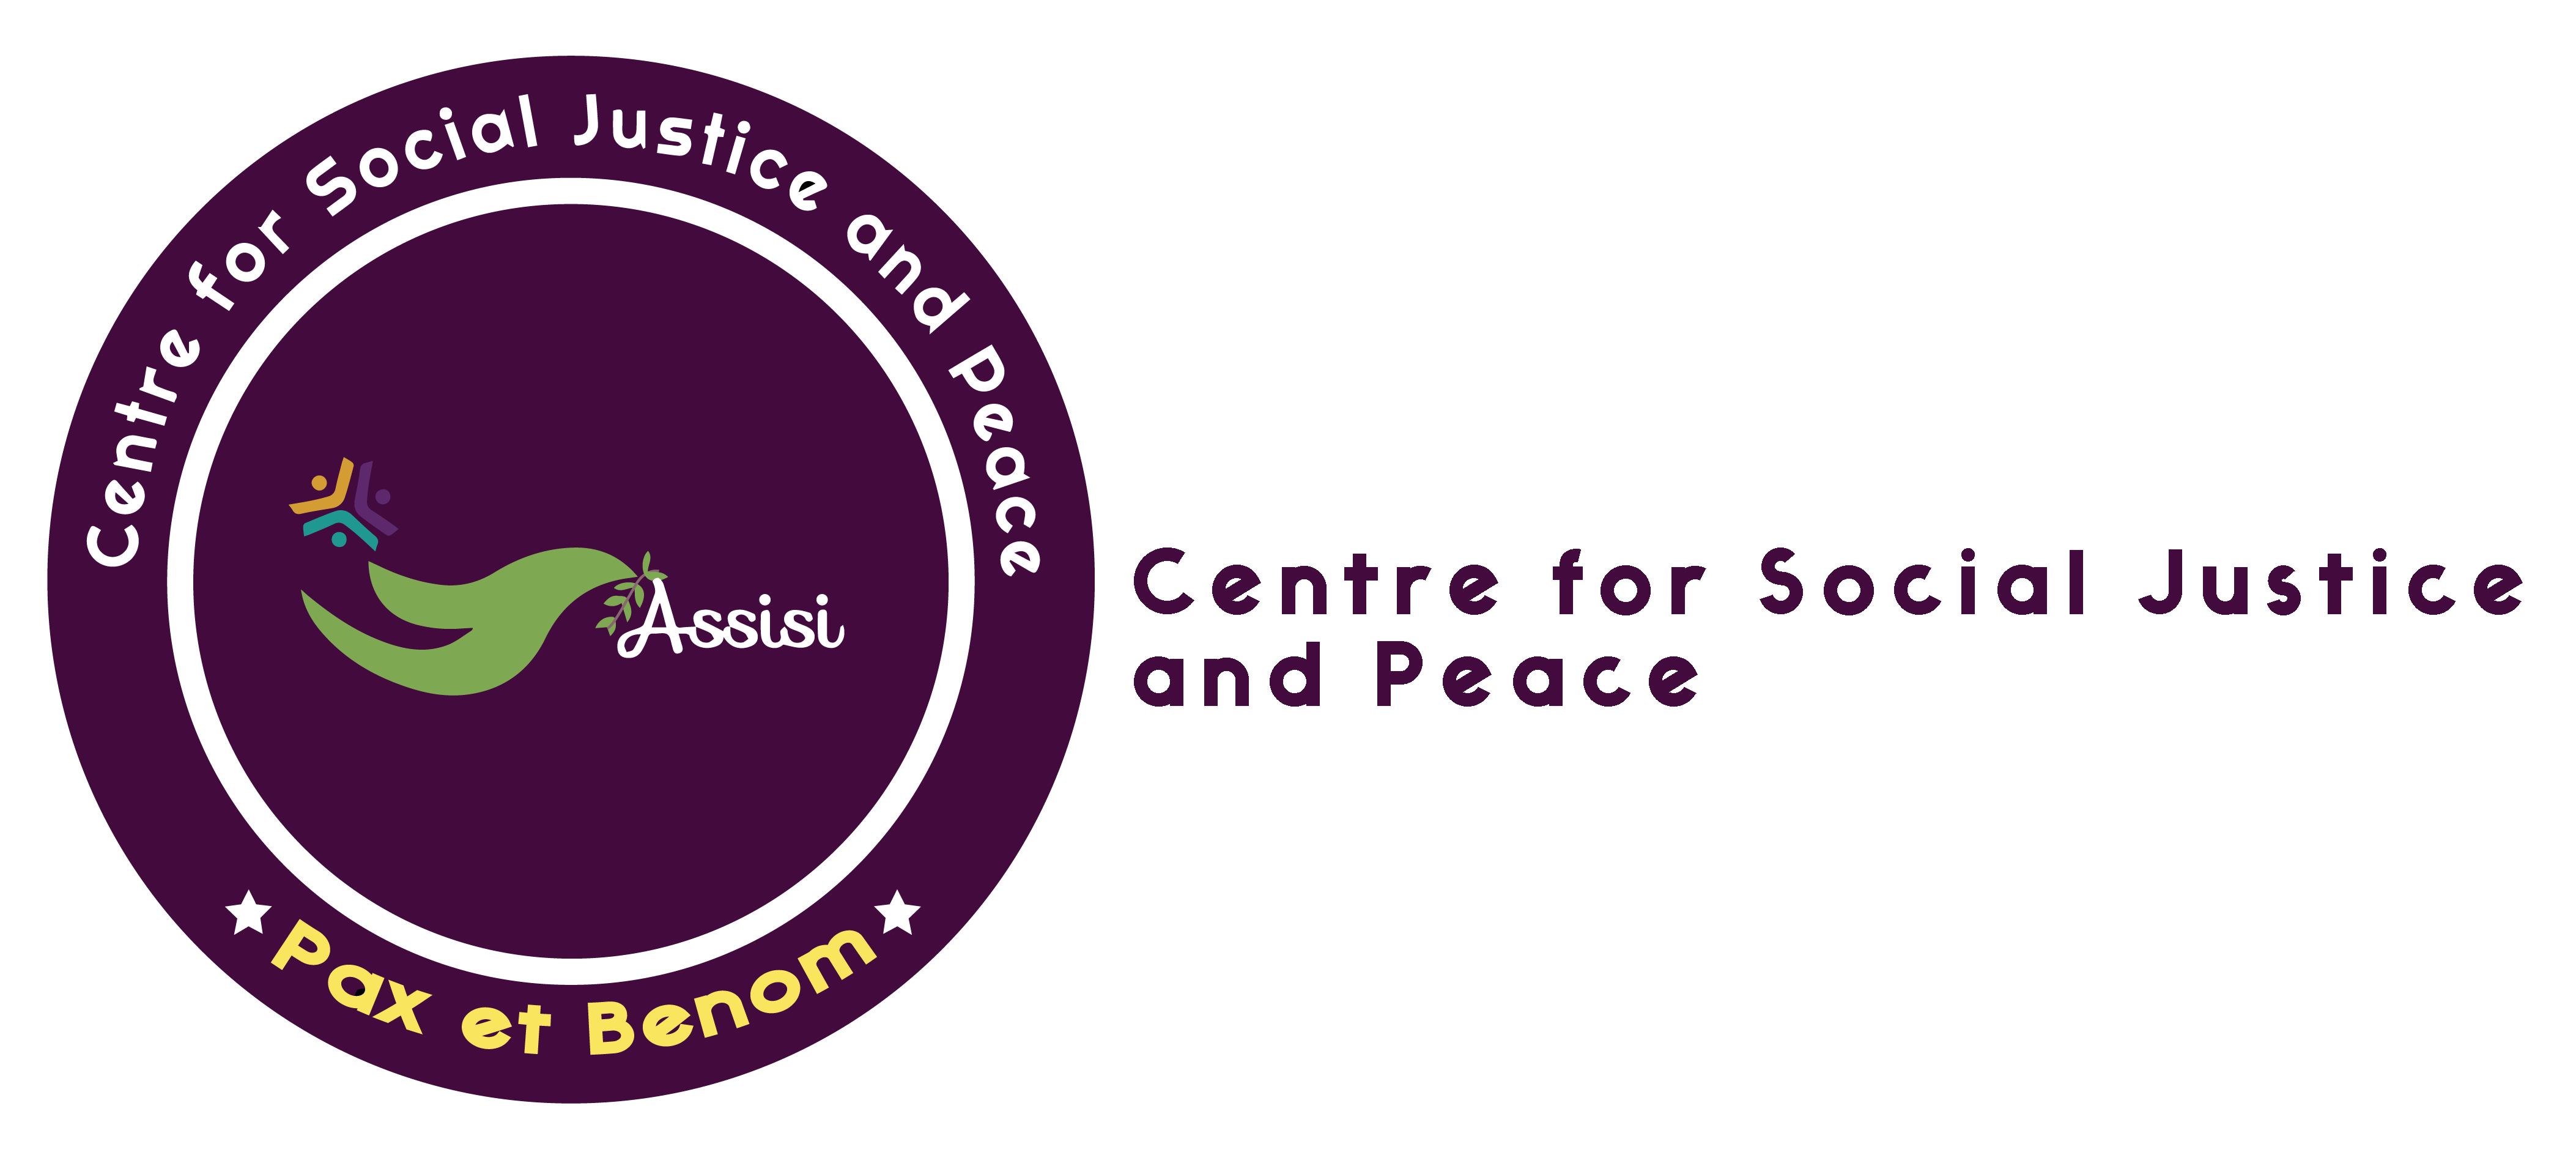 Assisi Centre for Social Justice and Peace